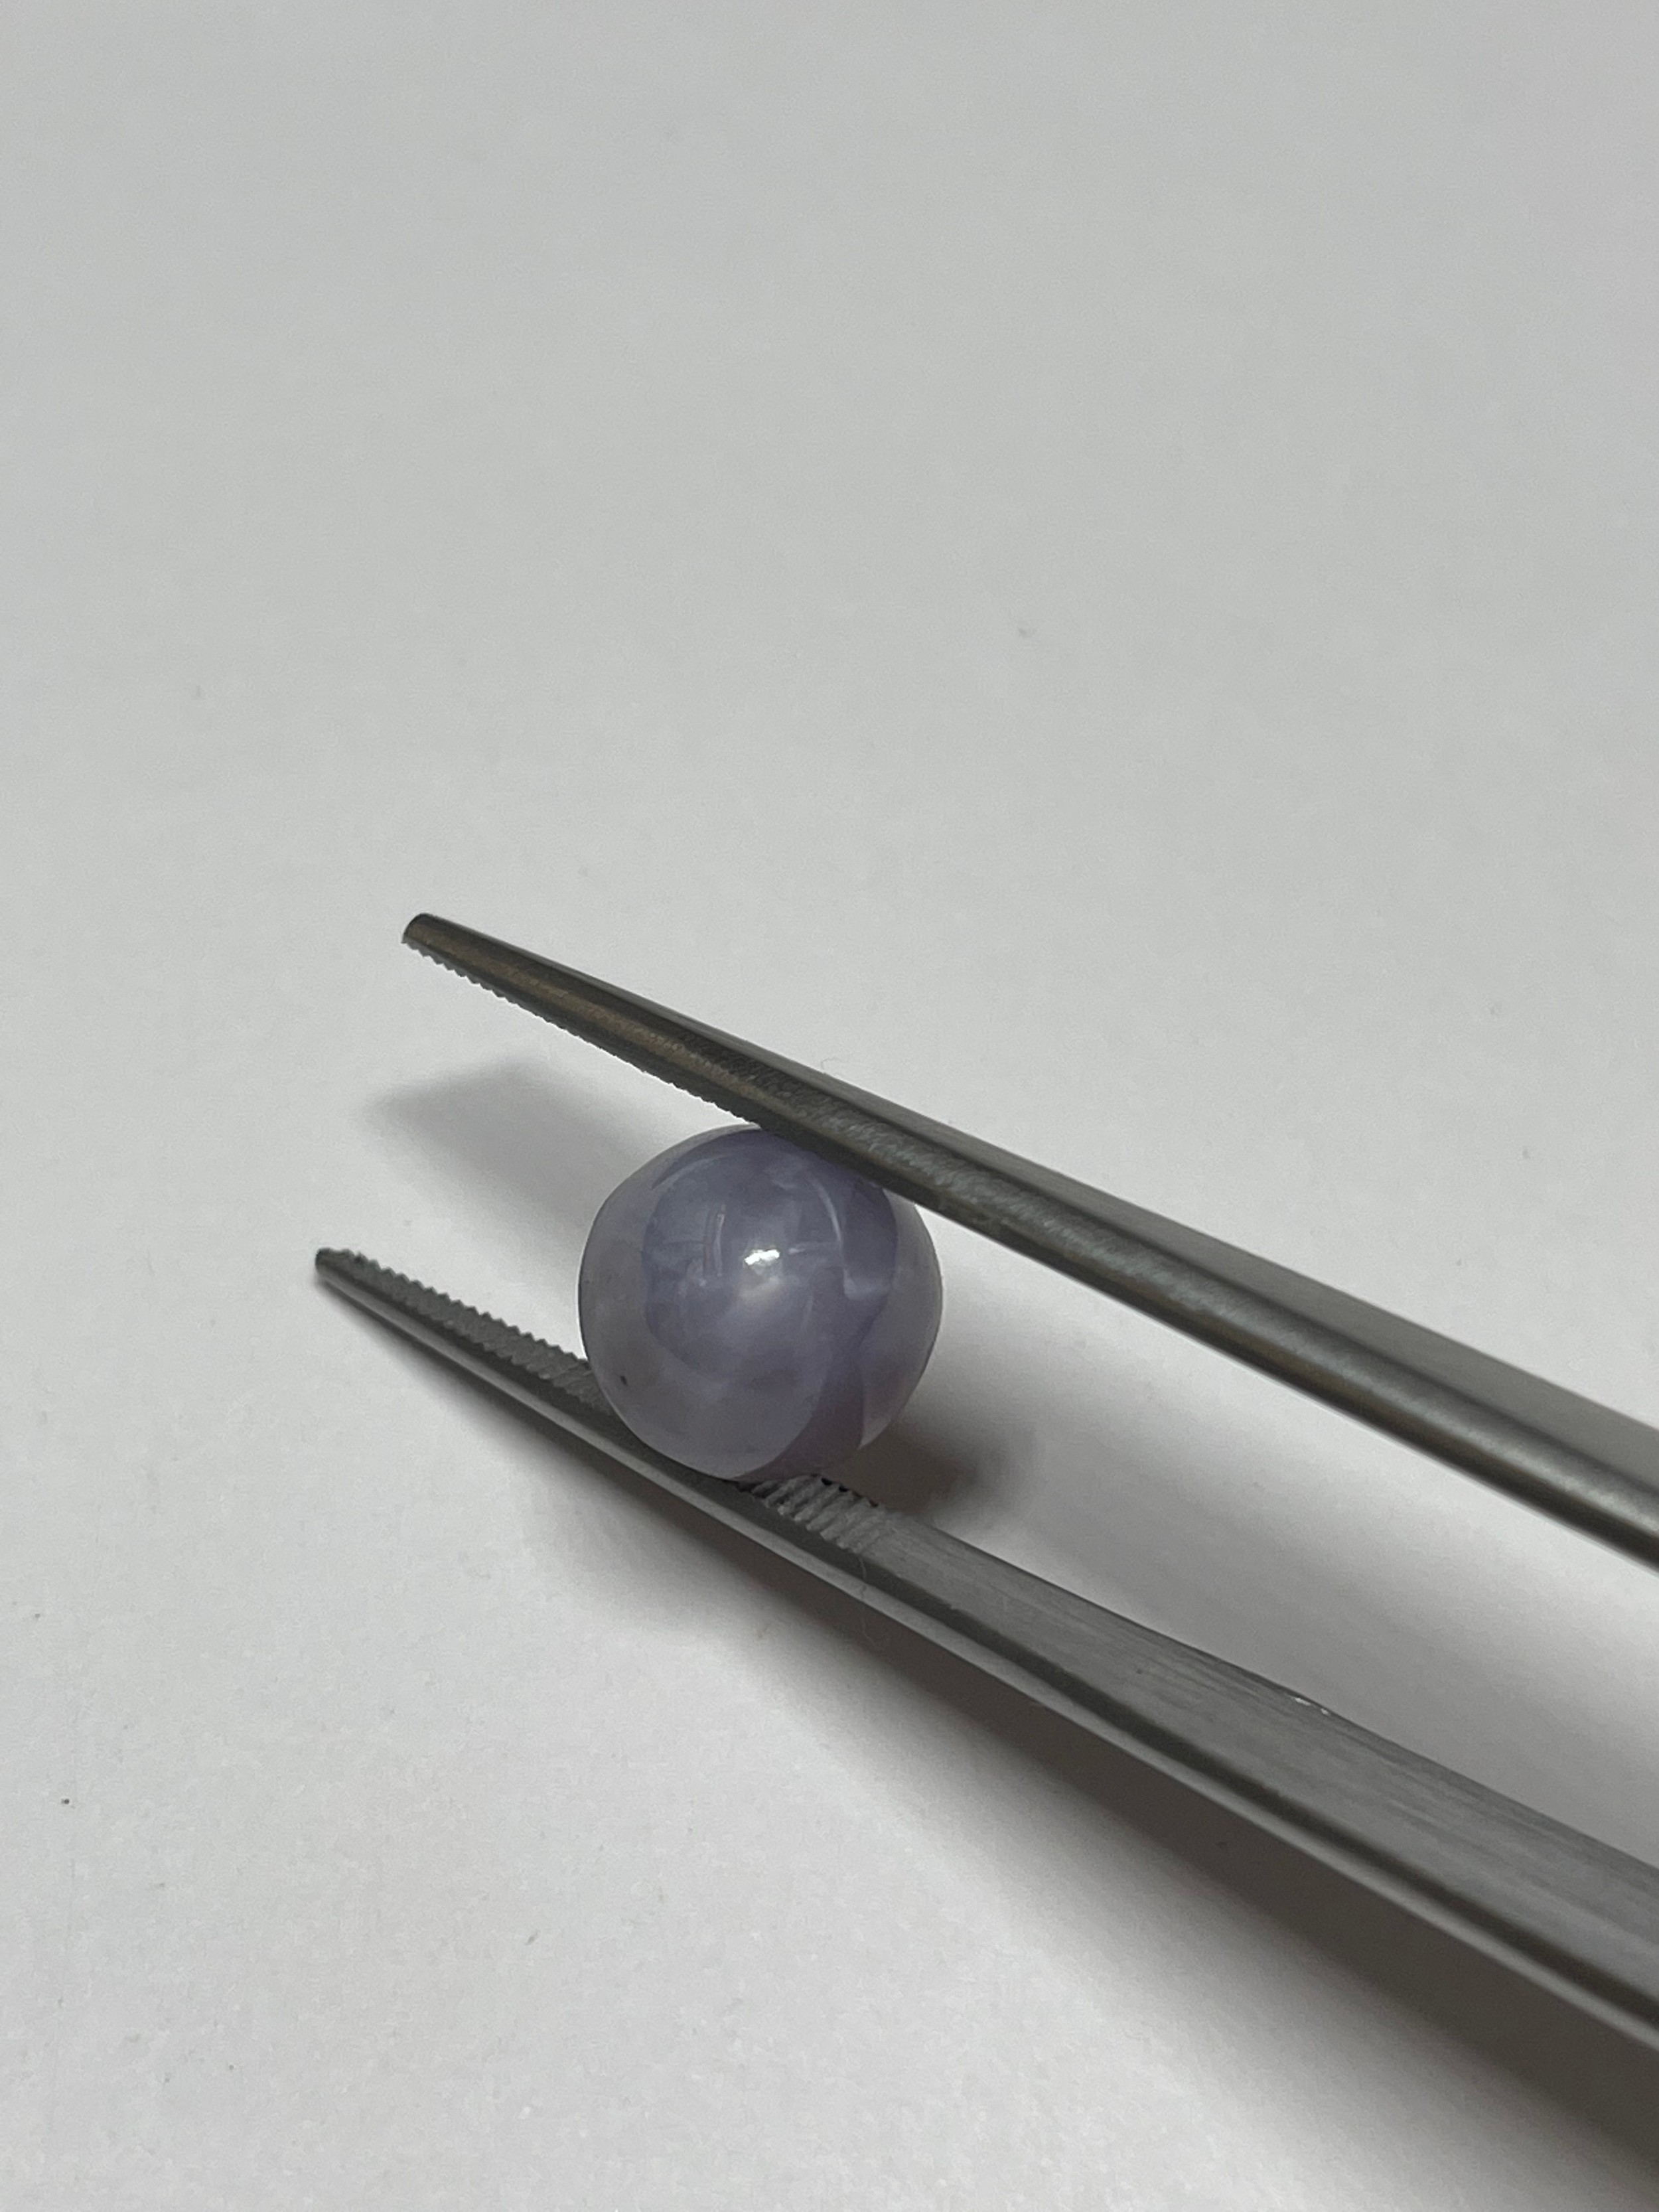 10.66ct Natural Star Sapphire Cabochon - Clear Asterism Effect - Image 2 of 2